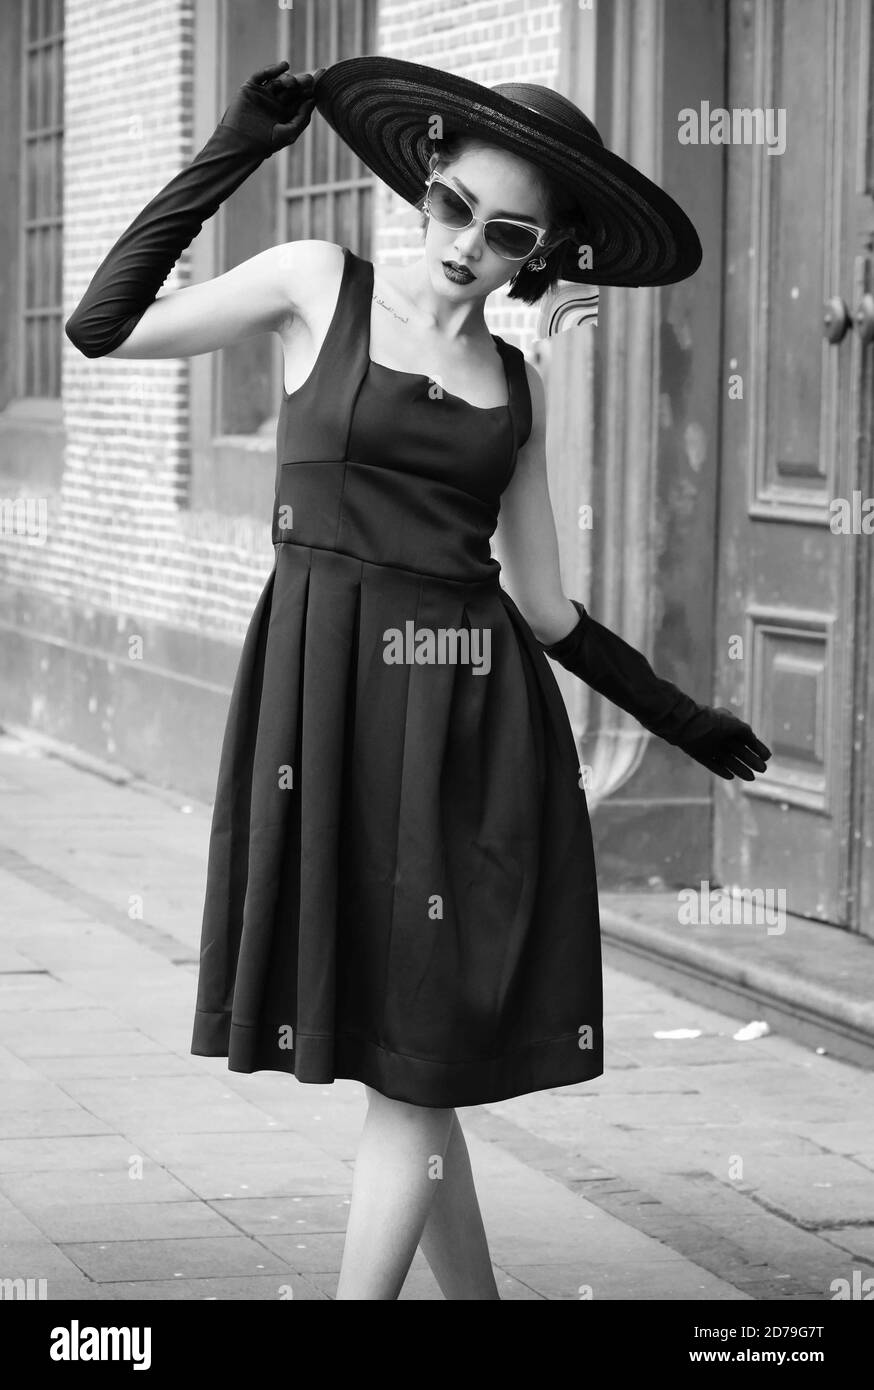 Black and white image of an Indonesian woman in a stylish pose looking down. Stock Photo